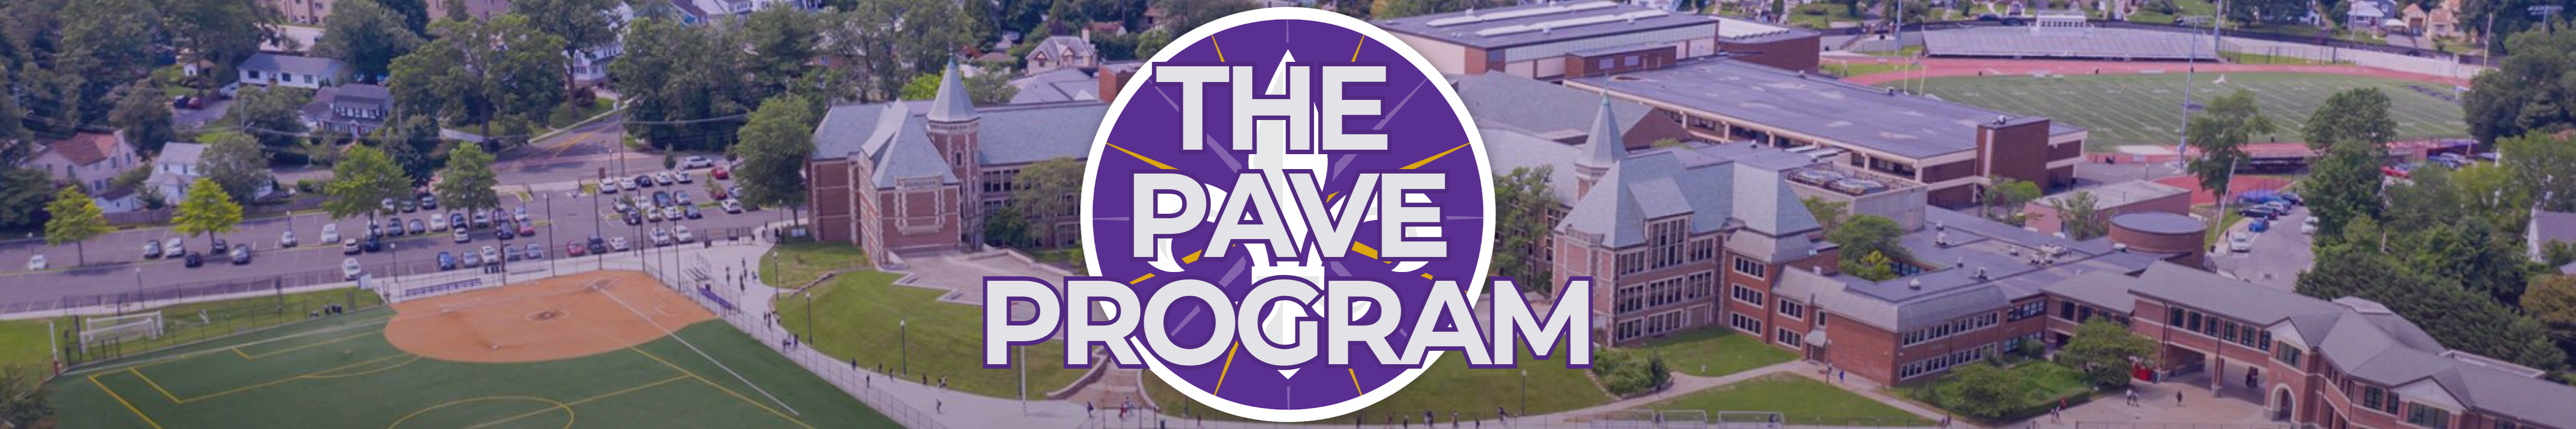 pave banner